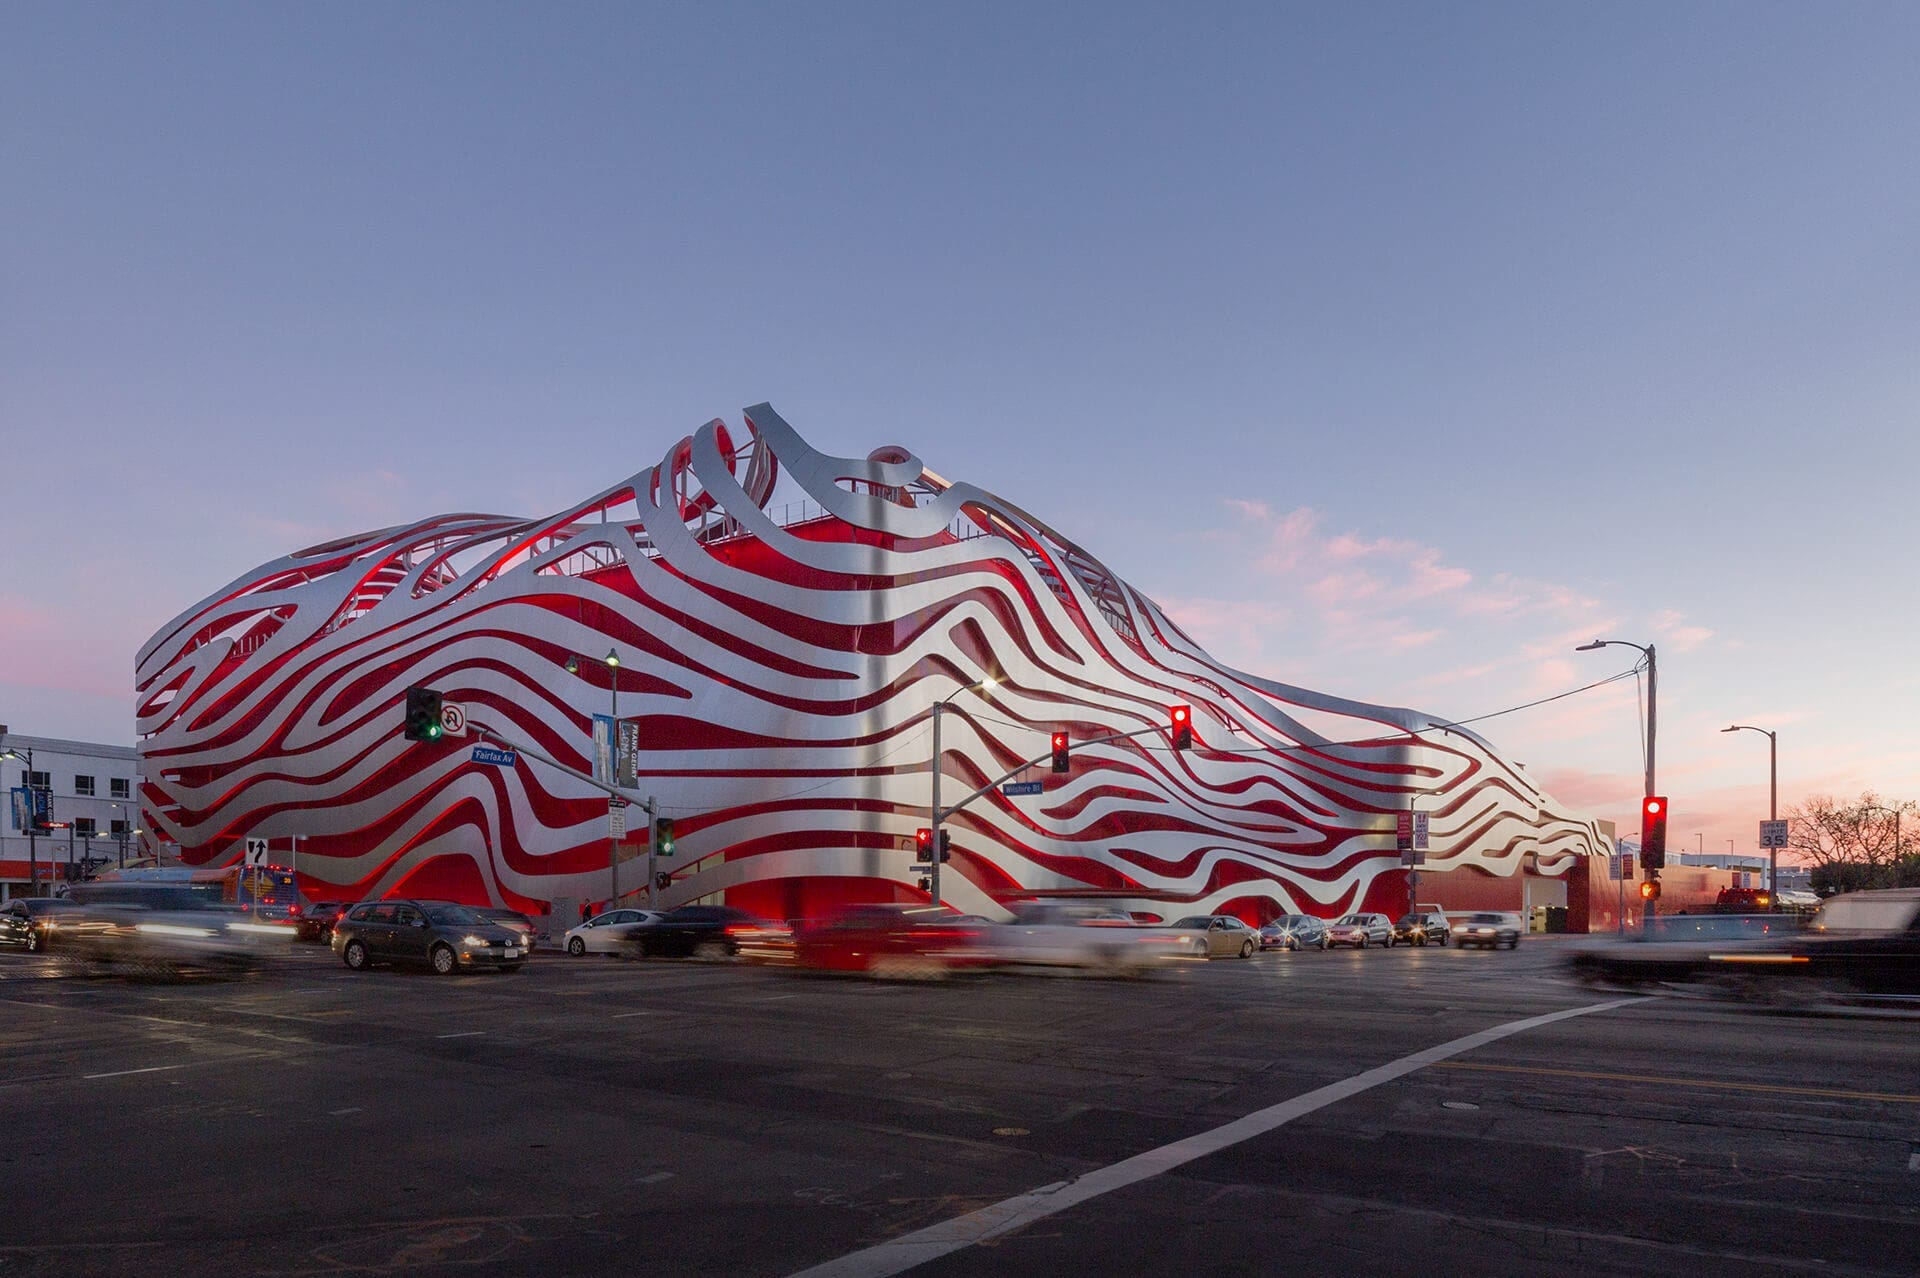 Design development for the Petersen Automotive Museum began in 2012. Principal Trent Tesch knew that the complex shapes would be best defined under a Design Assist contract with Zahner.